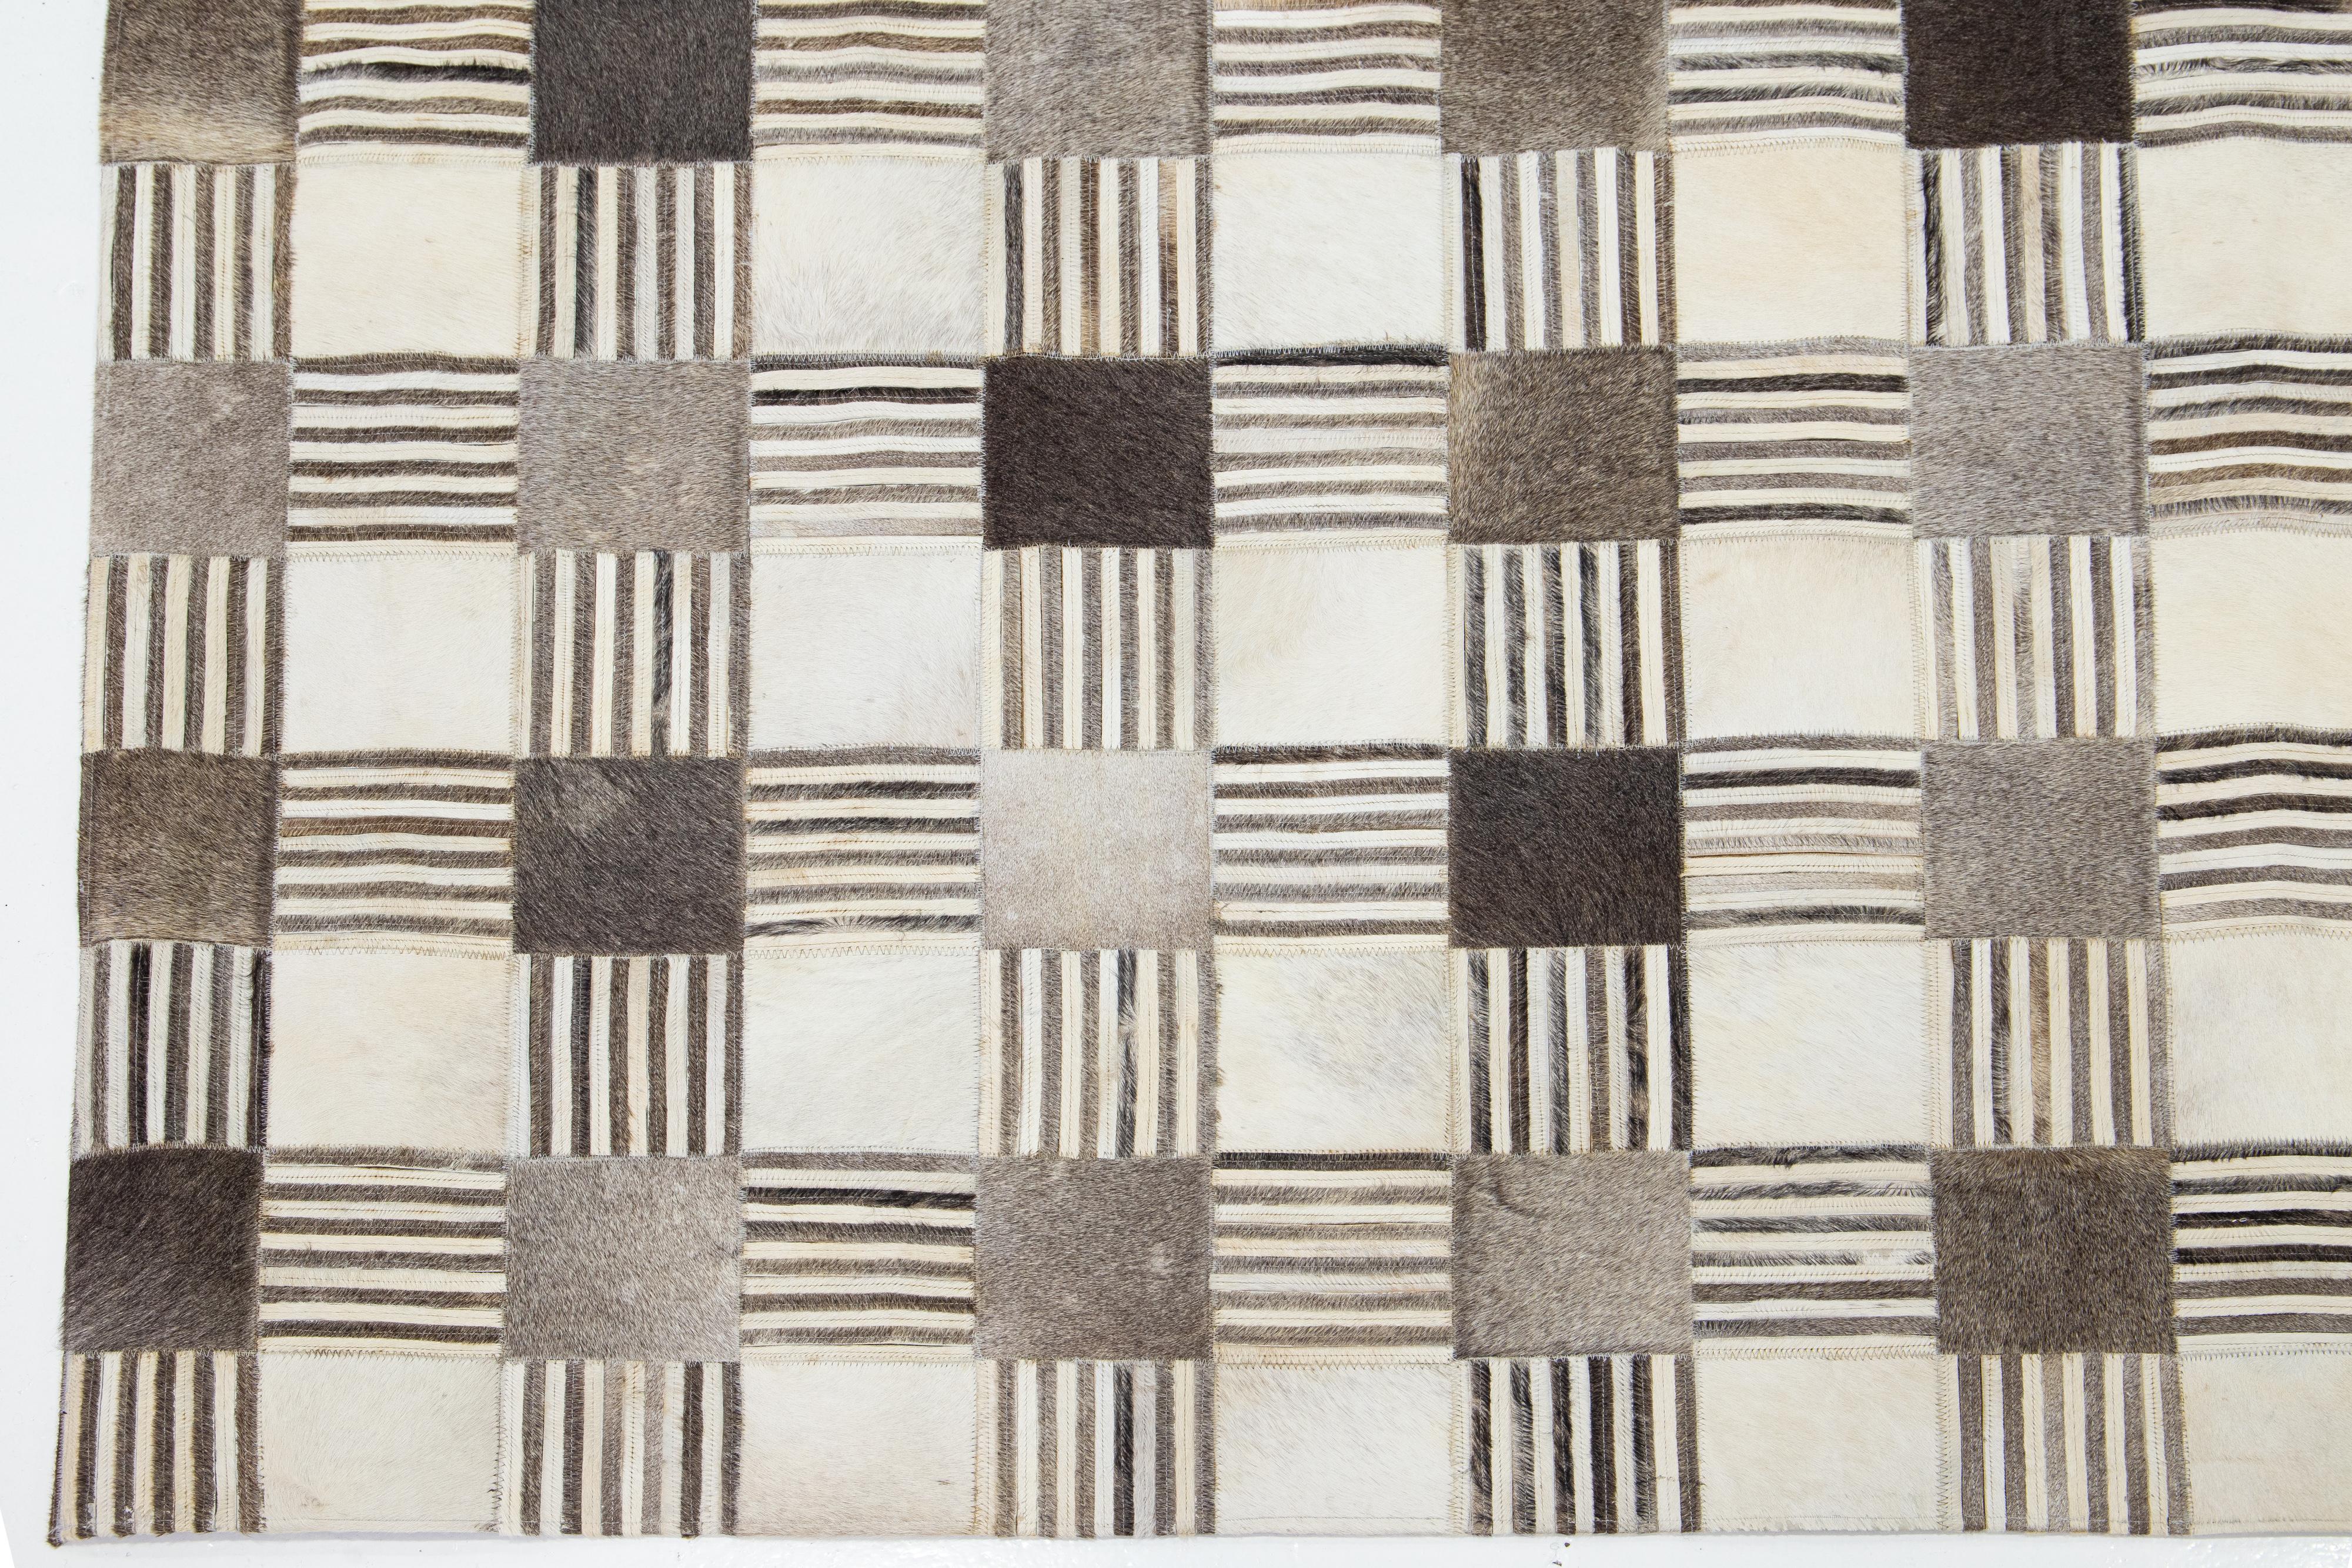 Contemporary Leather/Wool Patch Rug In Earthy Tones im Zustand „Neu“ im Angebot in Norwalk, CT